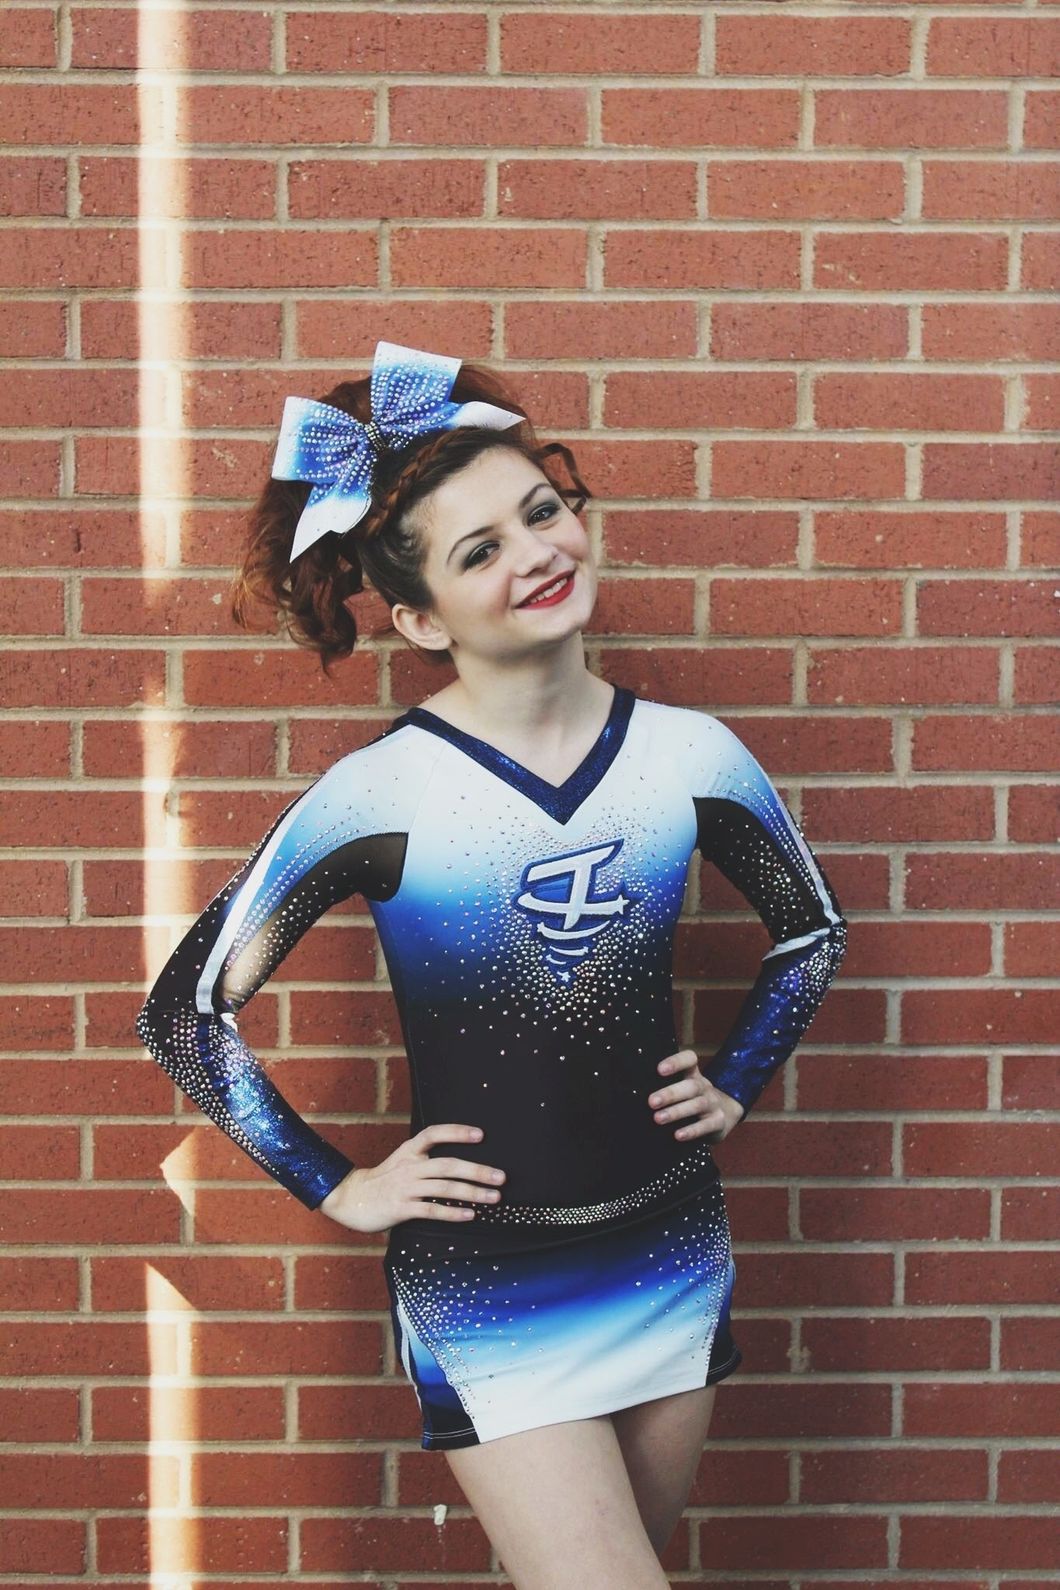 12 Signs You Were A Competitive Cheerleader